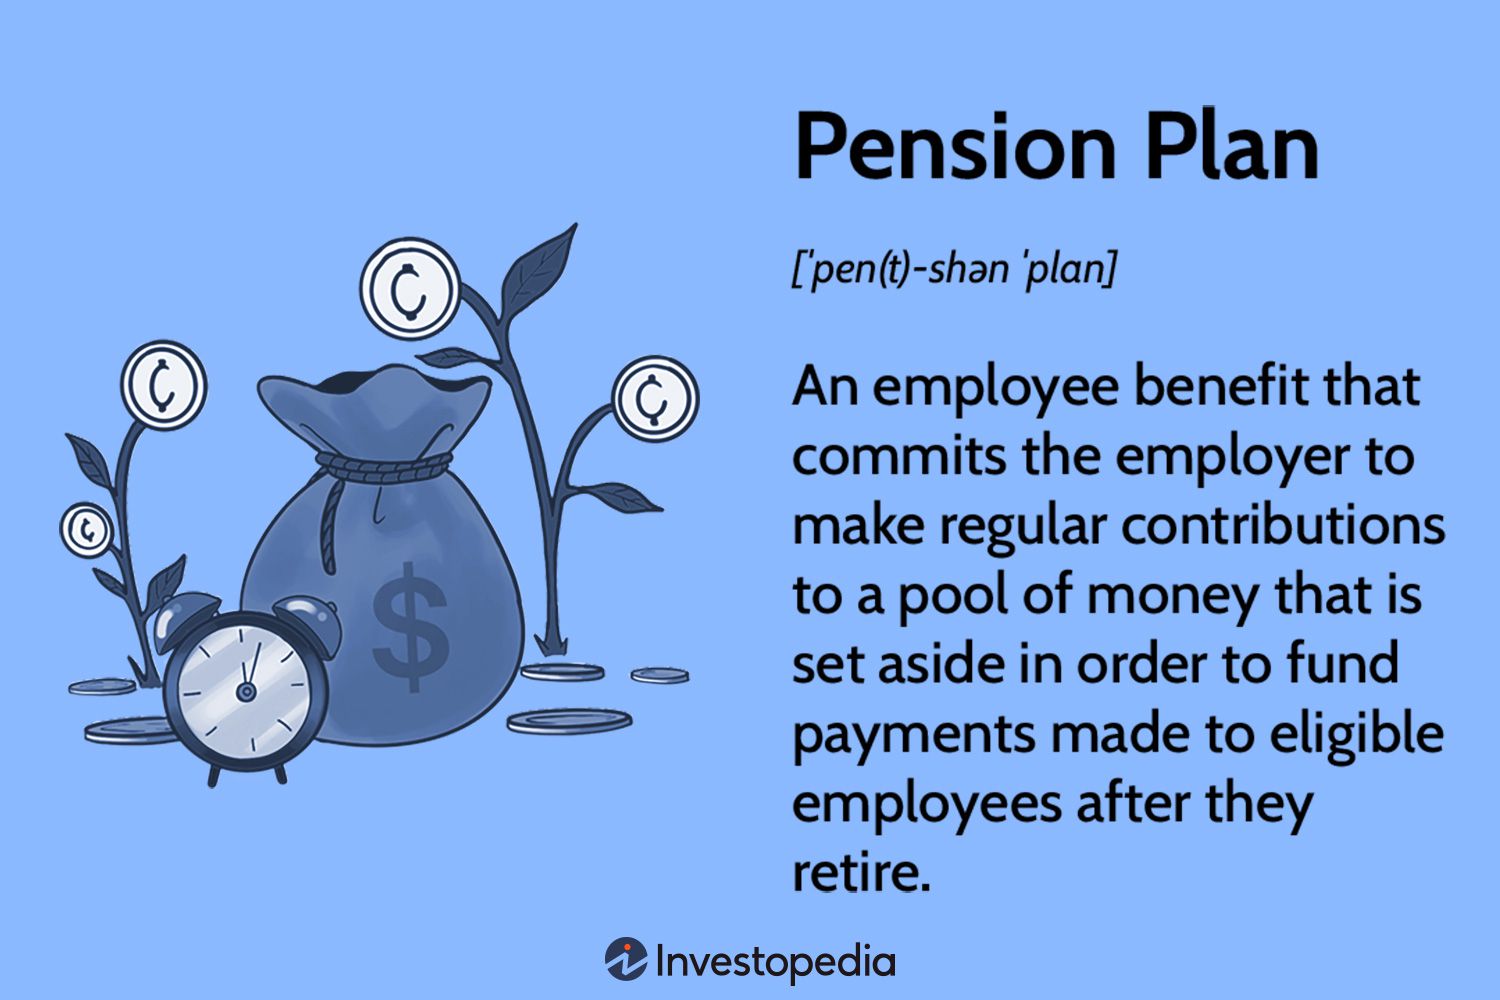  Pension Policy for employees for social benefit